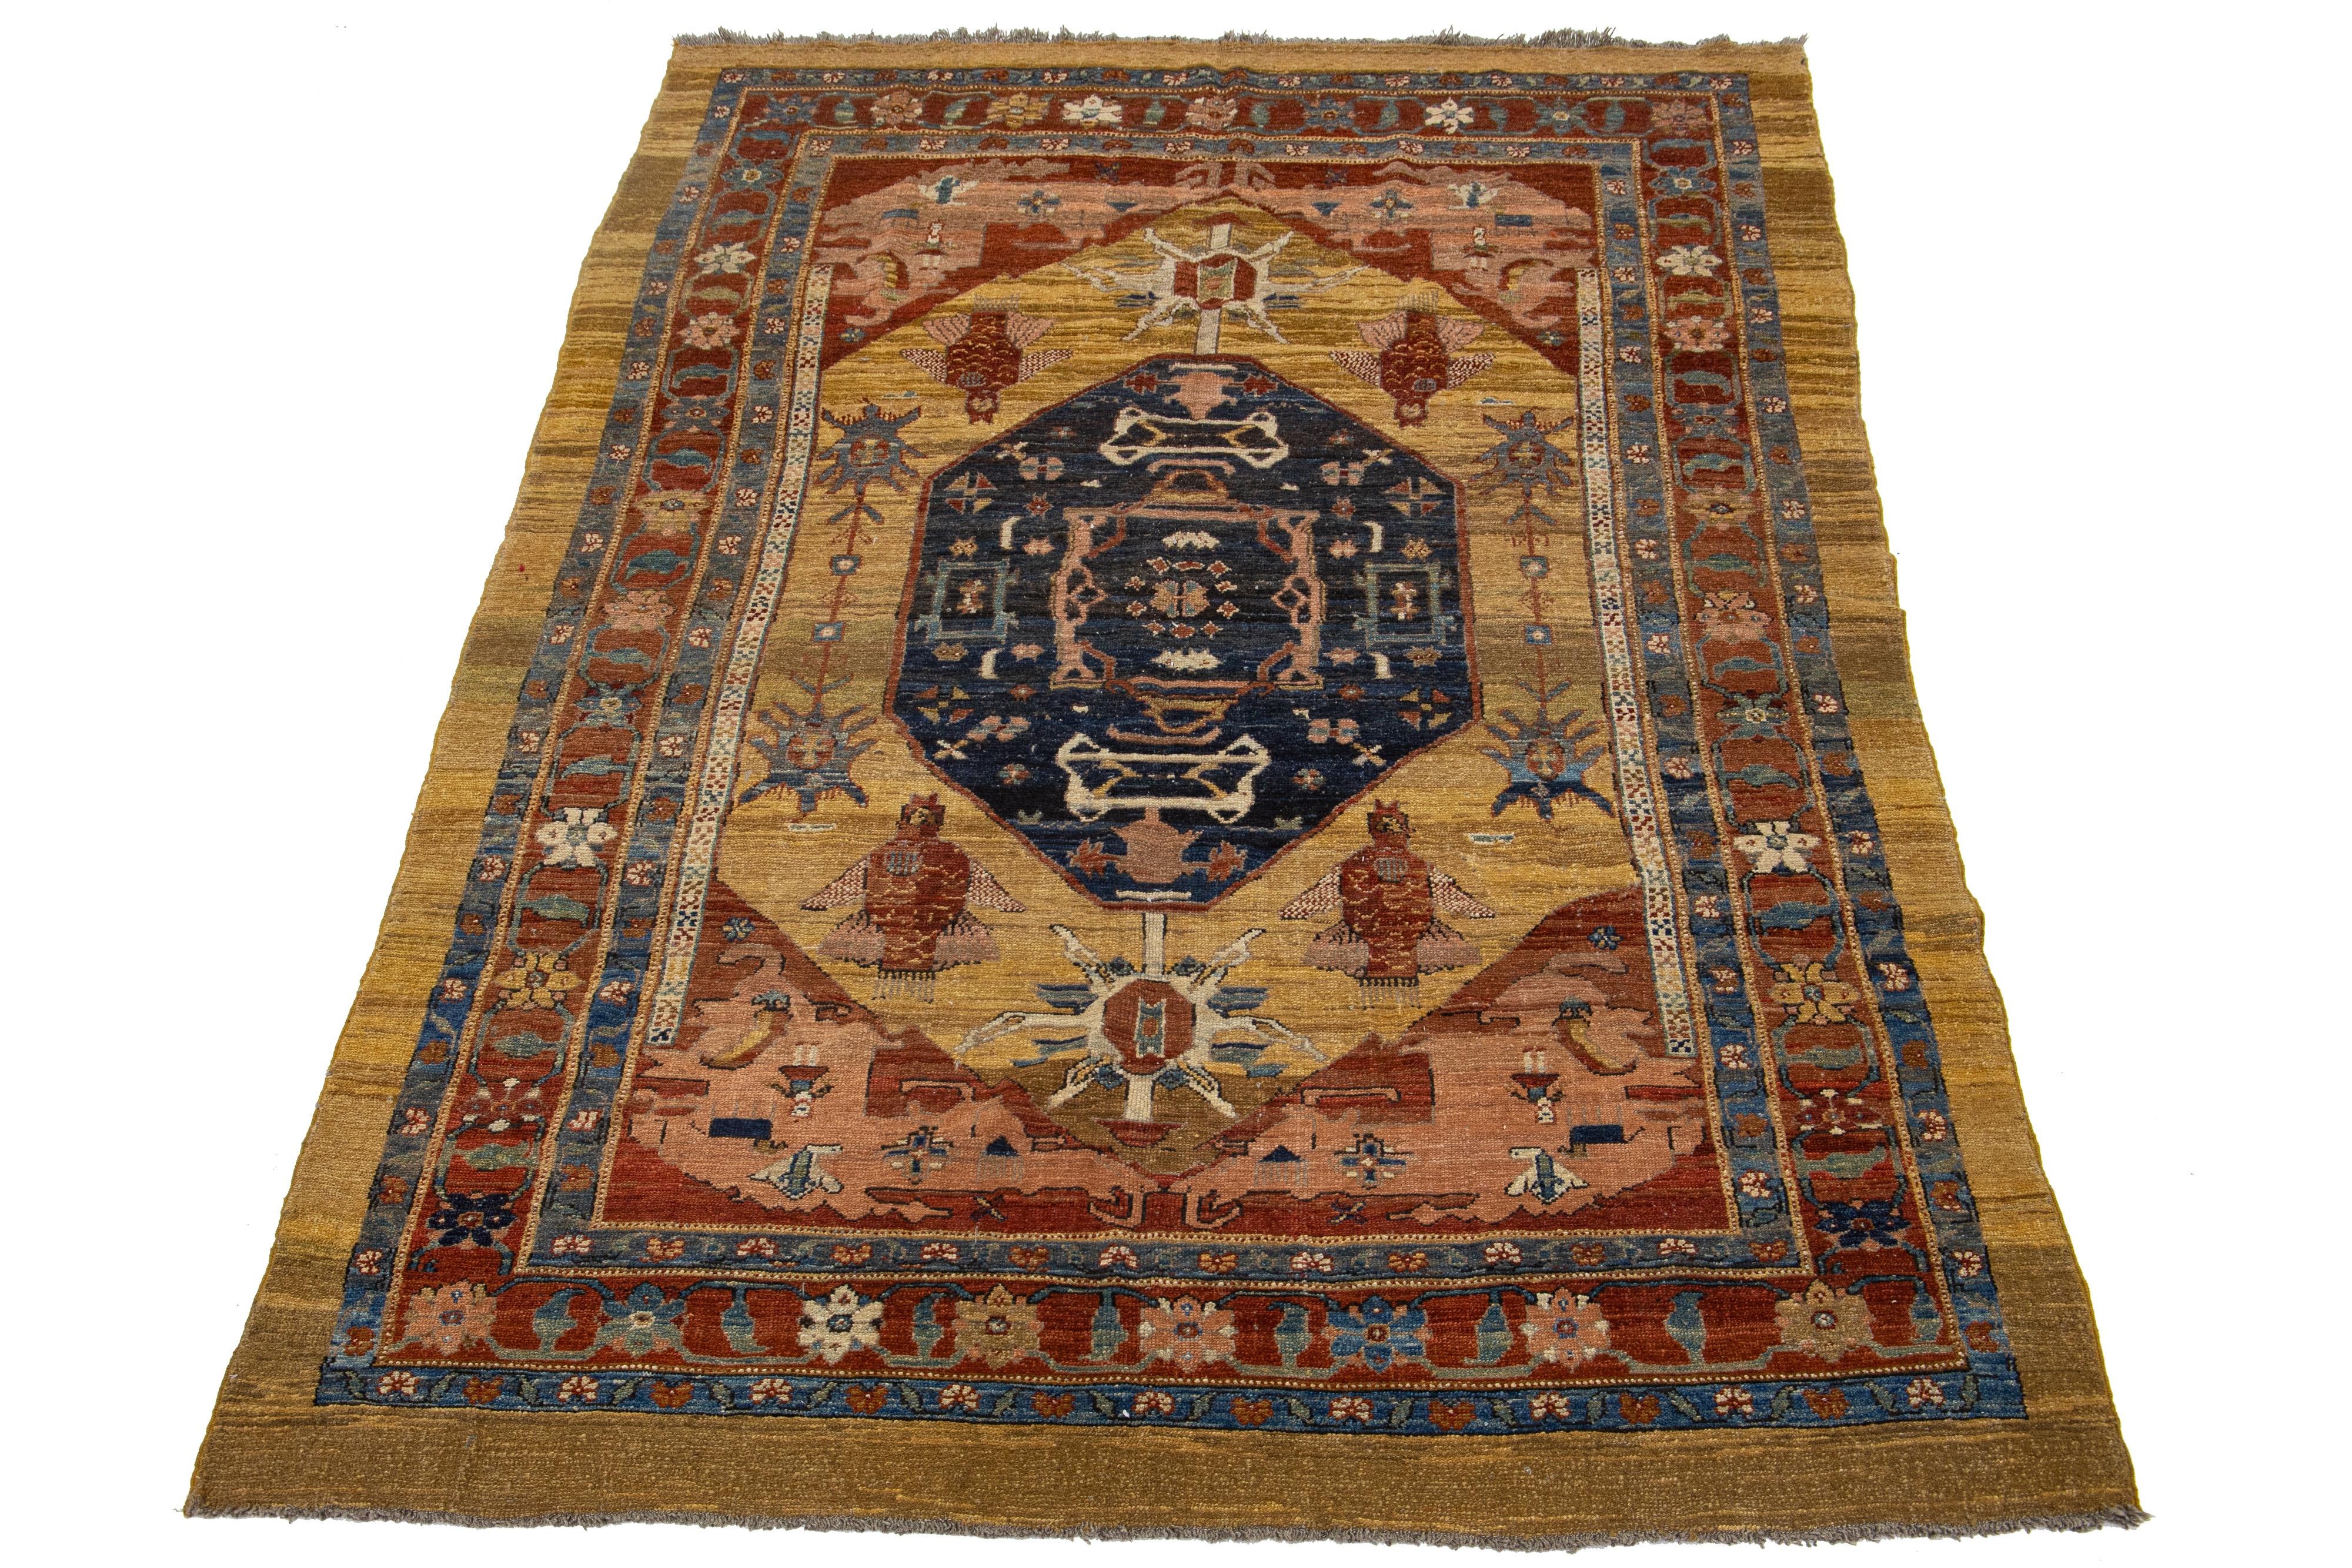 Beautiful vintage Bakshaish hand-knotted wool rug with a tan and brown color field. This Persian rug has the fame of rust, with blue and beige accents in an all-over geometric medallion design.

This rug measures 7' x 11'.